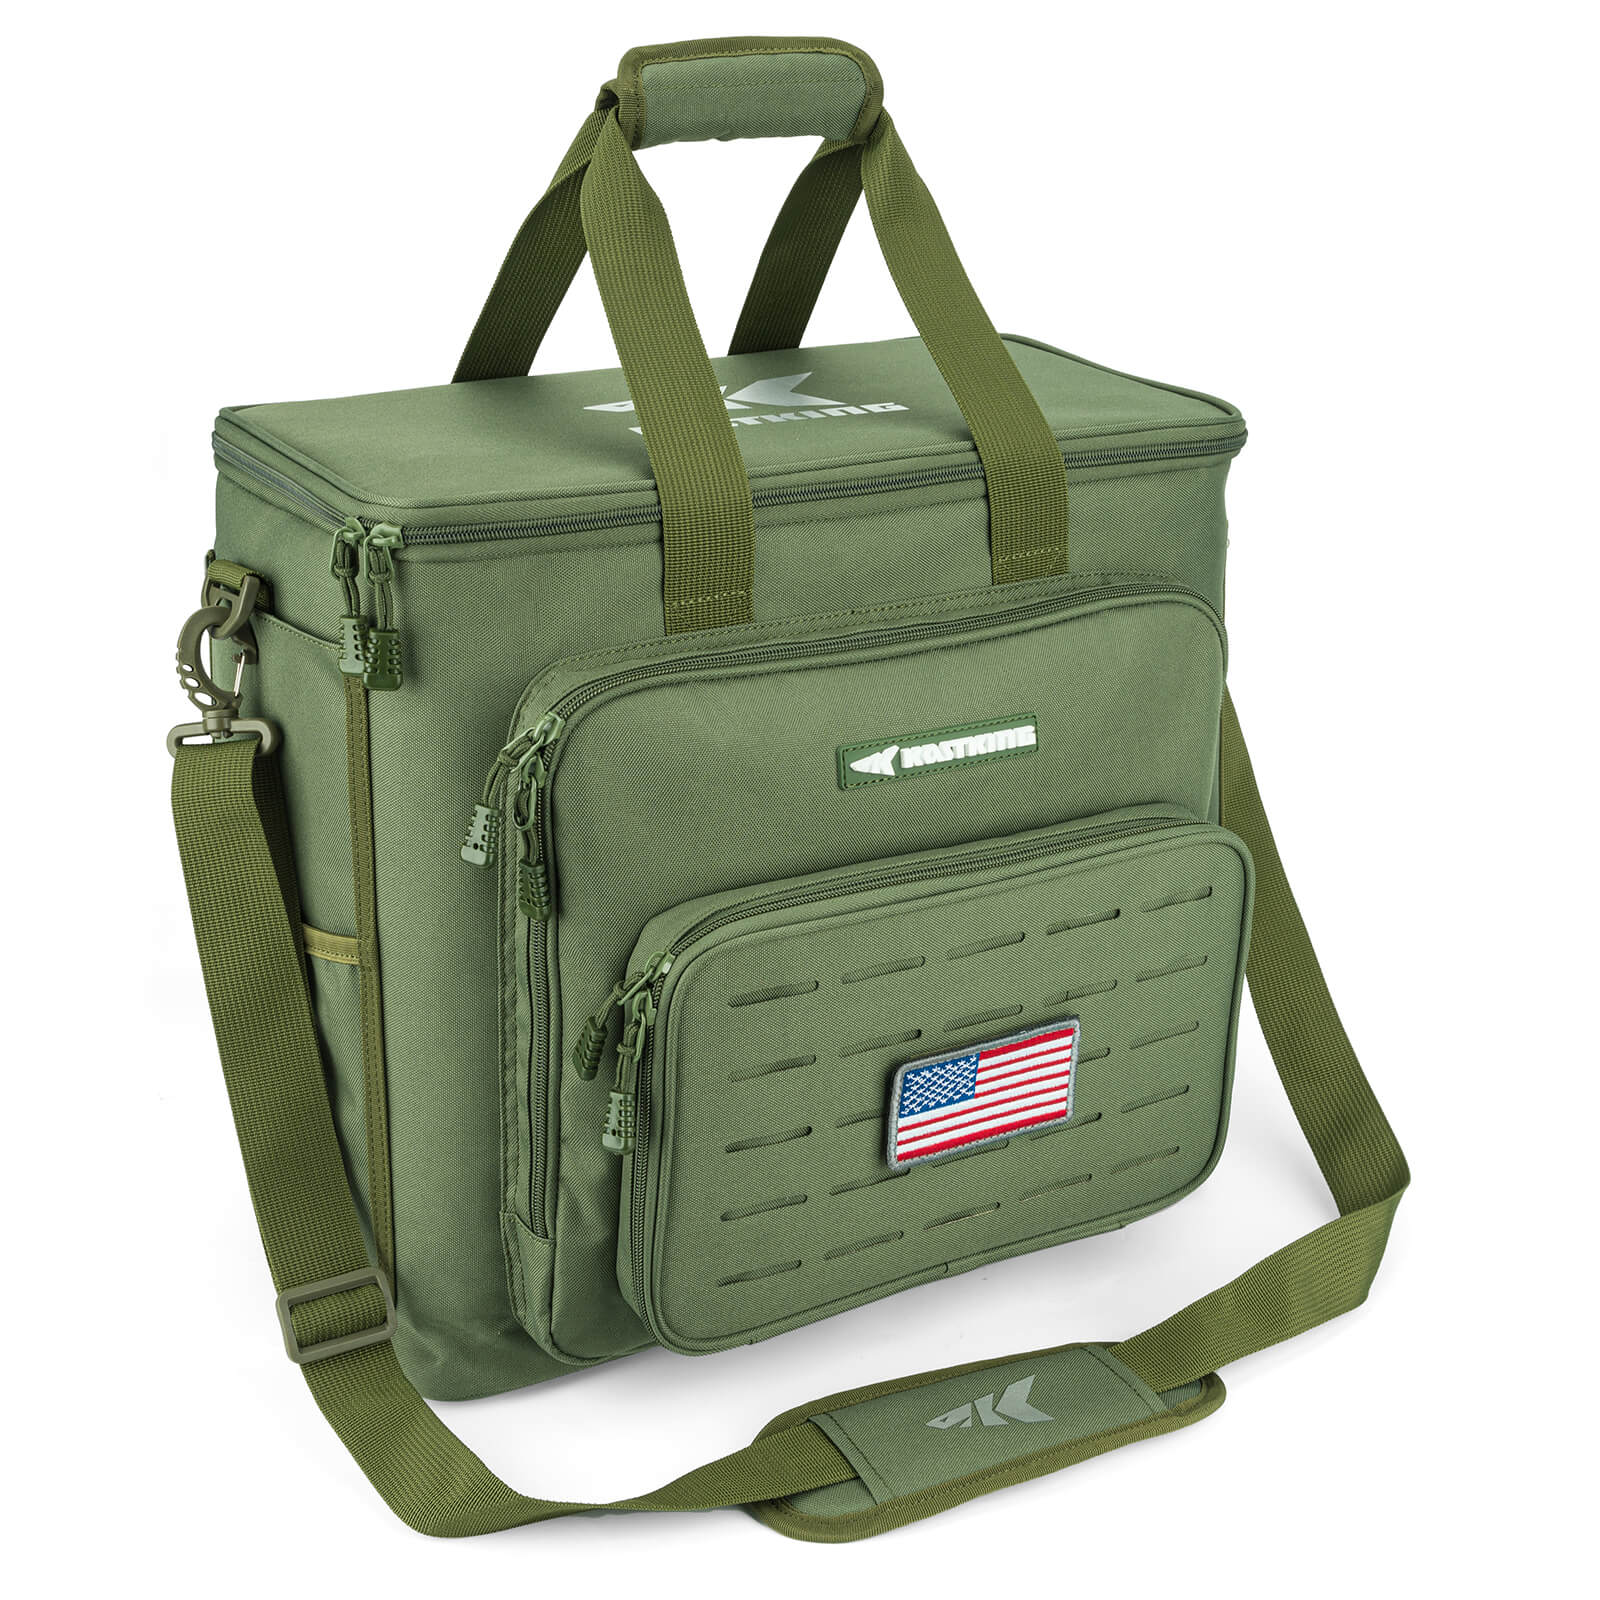 KastKing - The KastKing Hawg Tackle bag has plenty of room for all of your  gear..and we mean ALL of it!! . 20 internal and external storage  pockets,Neo-grip anti-slip shoulder bag strap